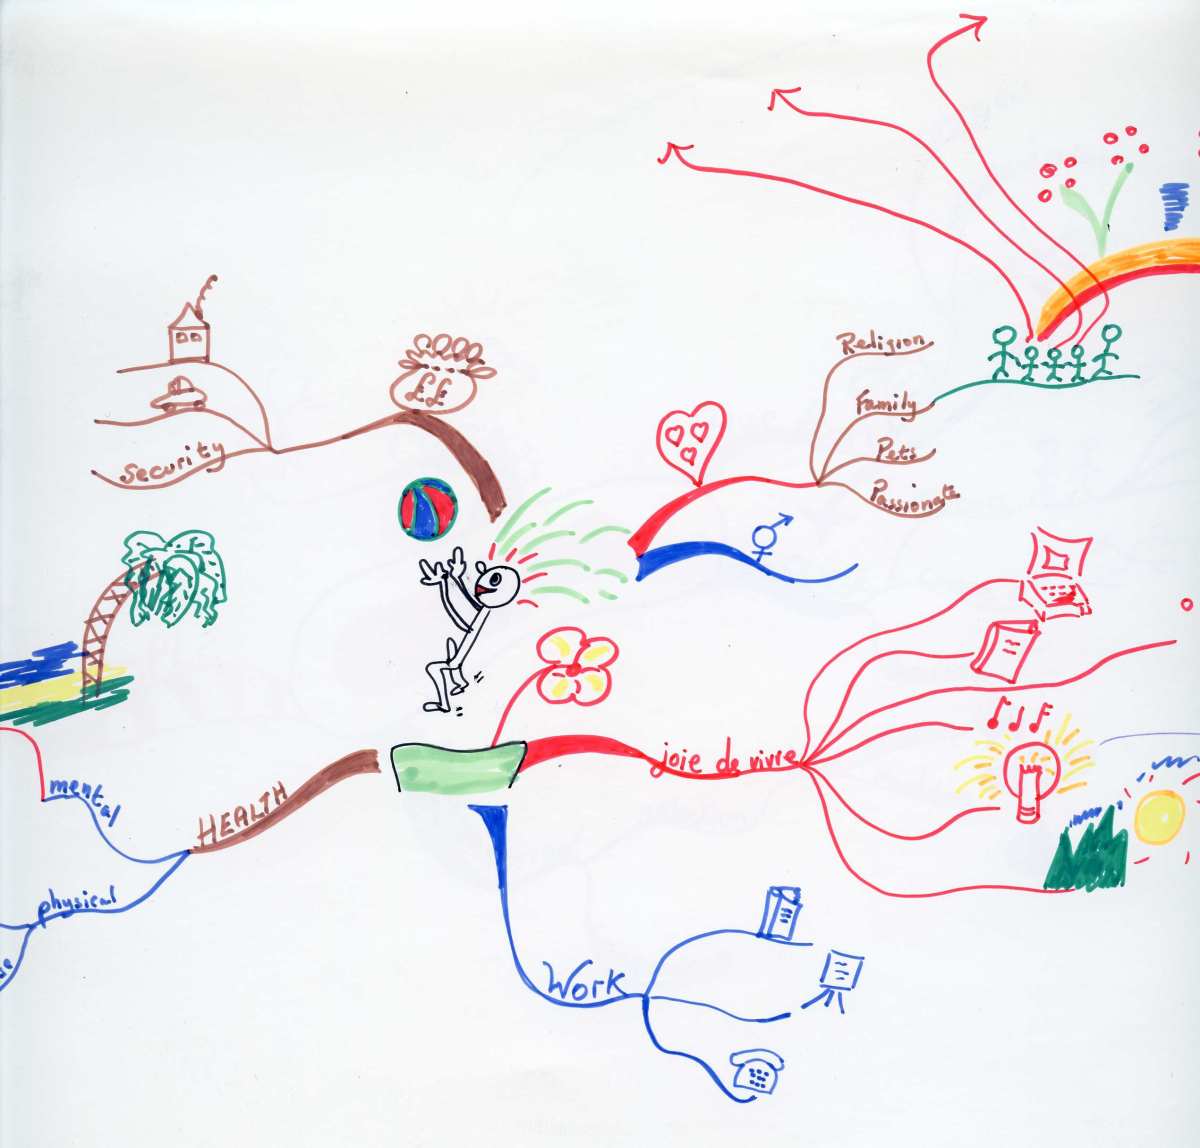 Example of a personal mind map covering personal development and life interests. Note that the central focus is of a stick person having fun (throwing a ball). There is lots of colour included and the diagrams do NOT need artistic talent.